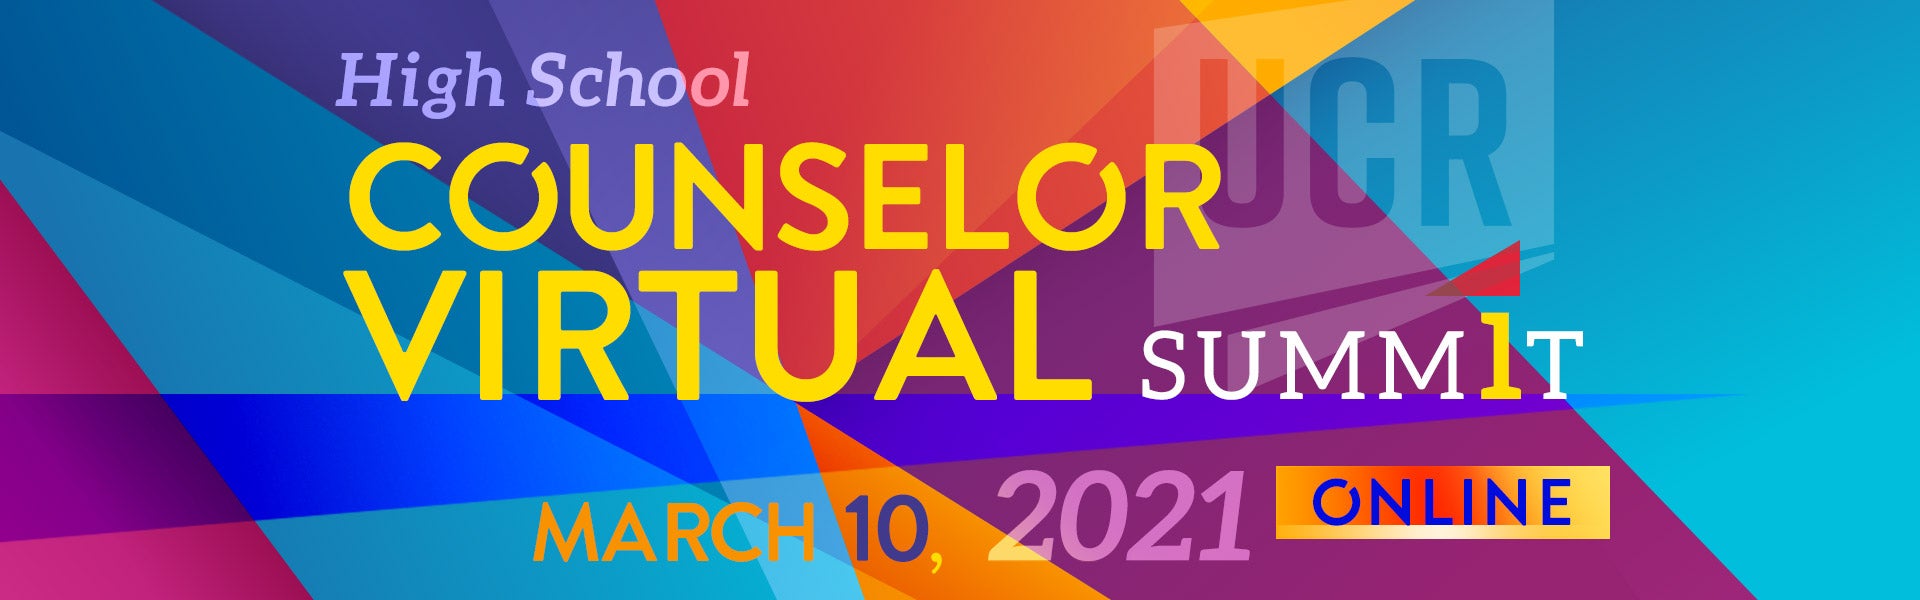 High School Counselor Virtual Summit | March 10, 2021 | Online